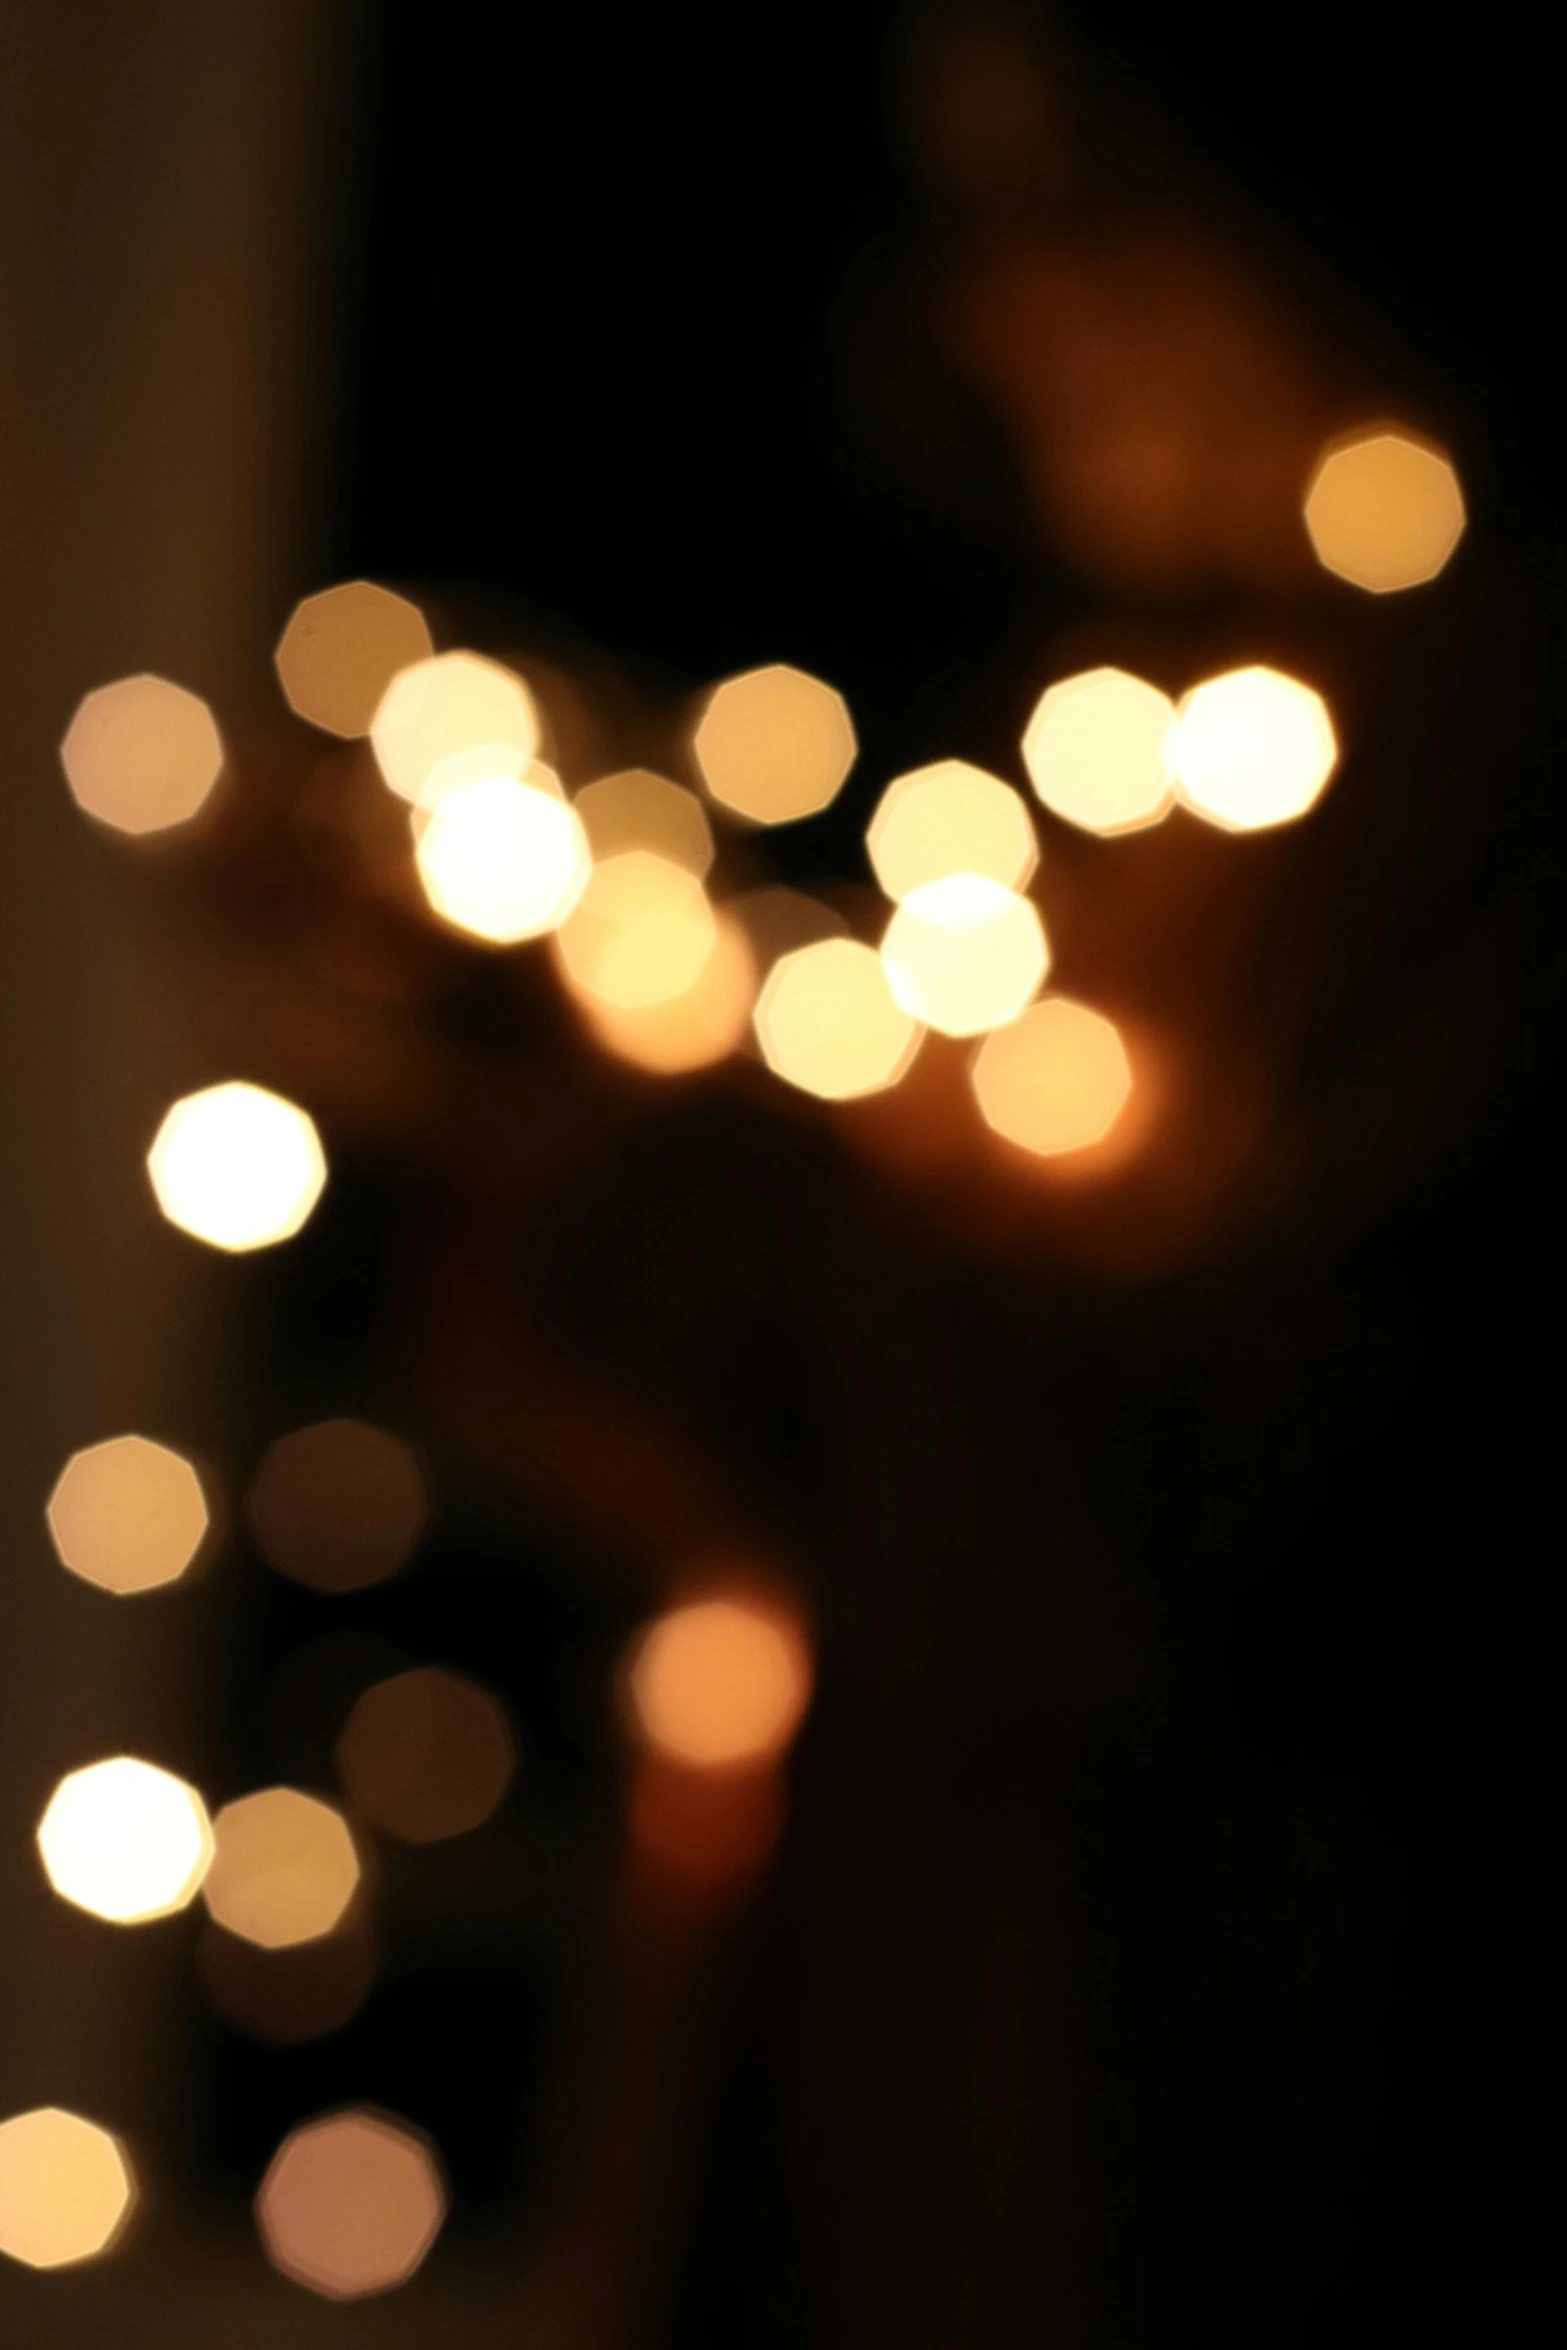 a close up of a person holding a cell phone, light and space, string lights, soft diffused light, candlelight, boke